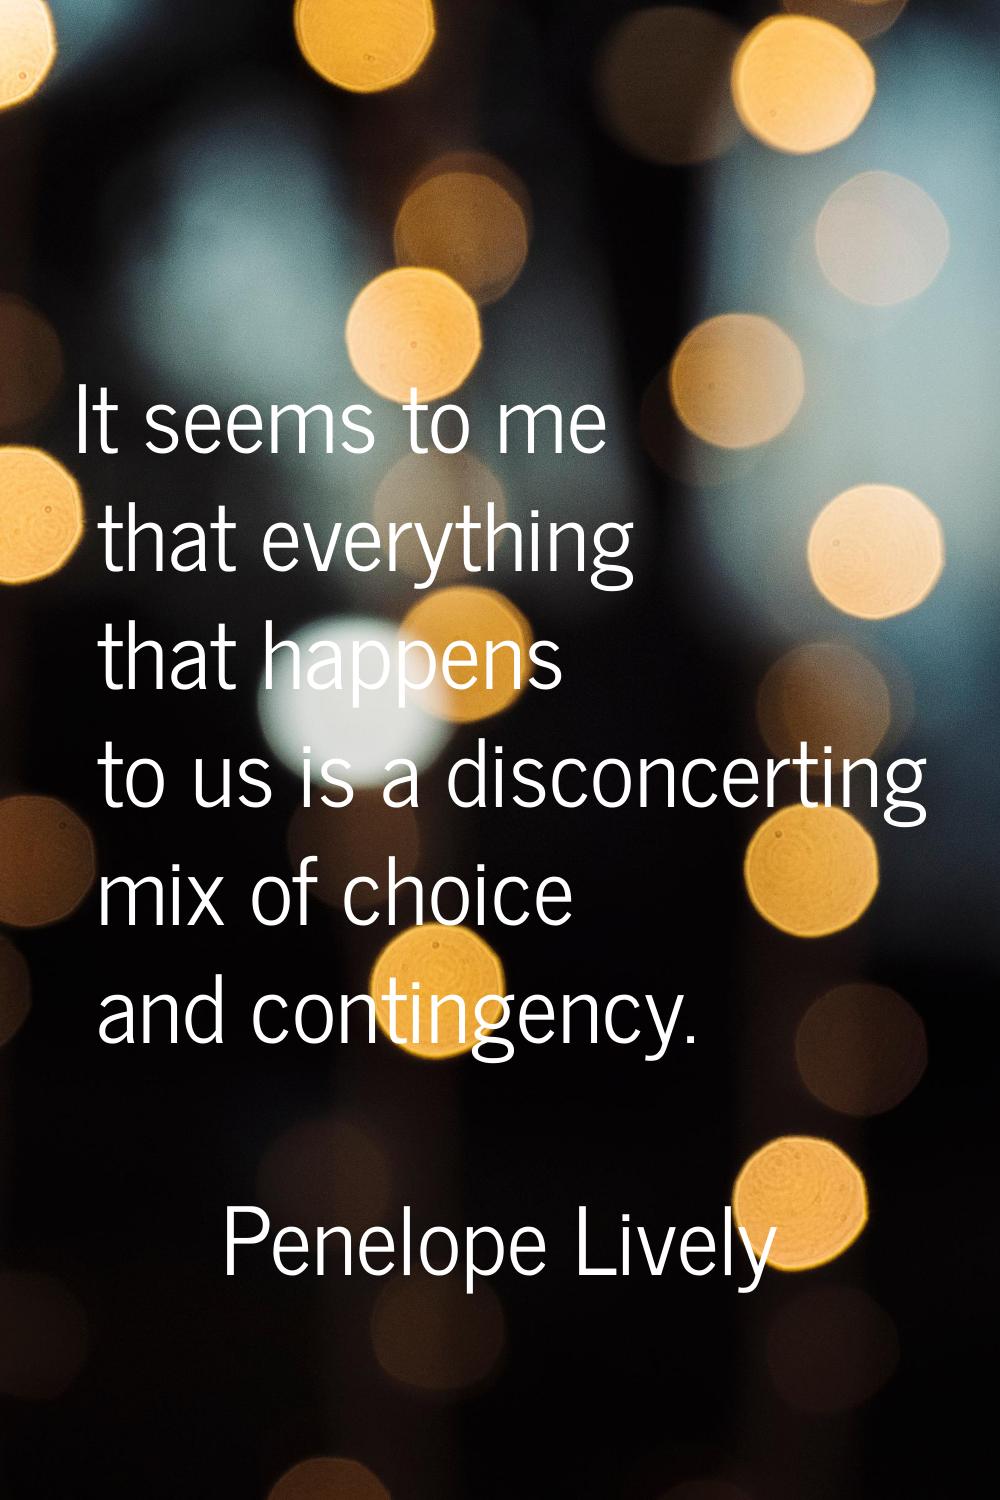 It seems to me that everything that happens to us is a disconcerting mix of choice and contingency.